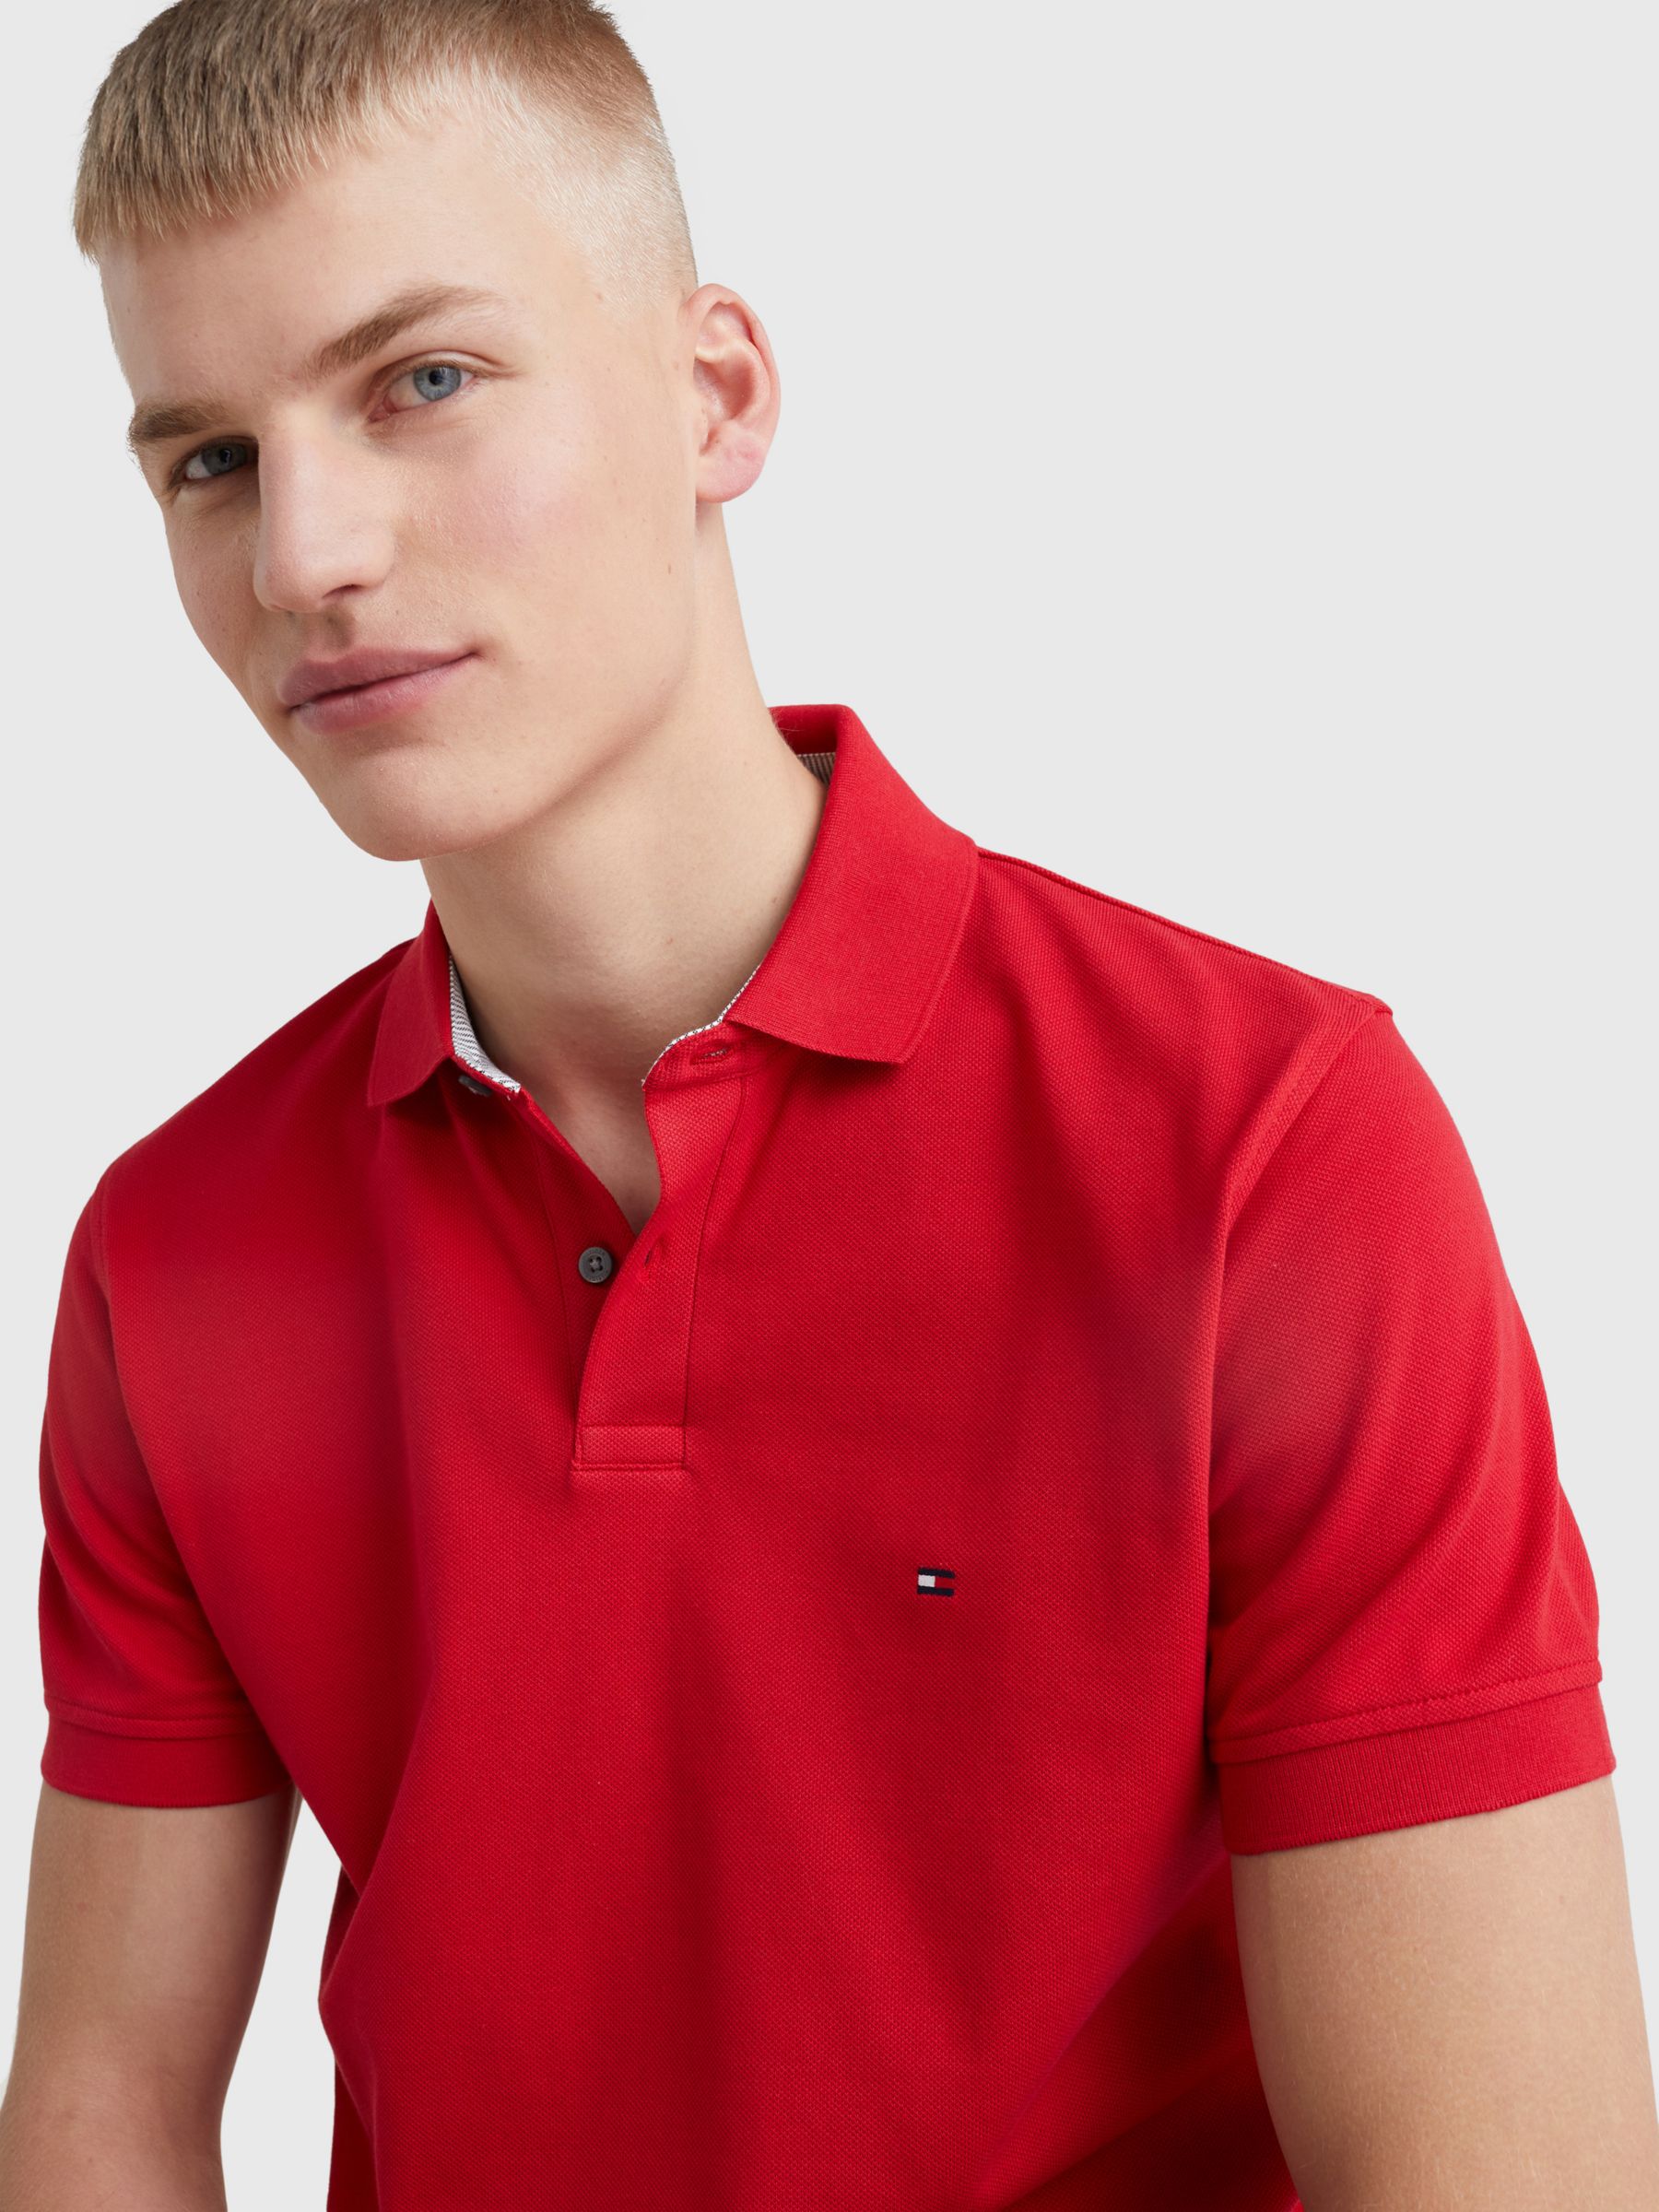 Tommy Hilfiger 1985 Classic Short Sleeve Polo Shirt, Primary Red, L